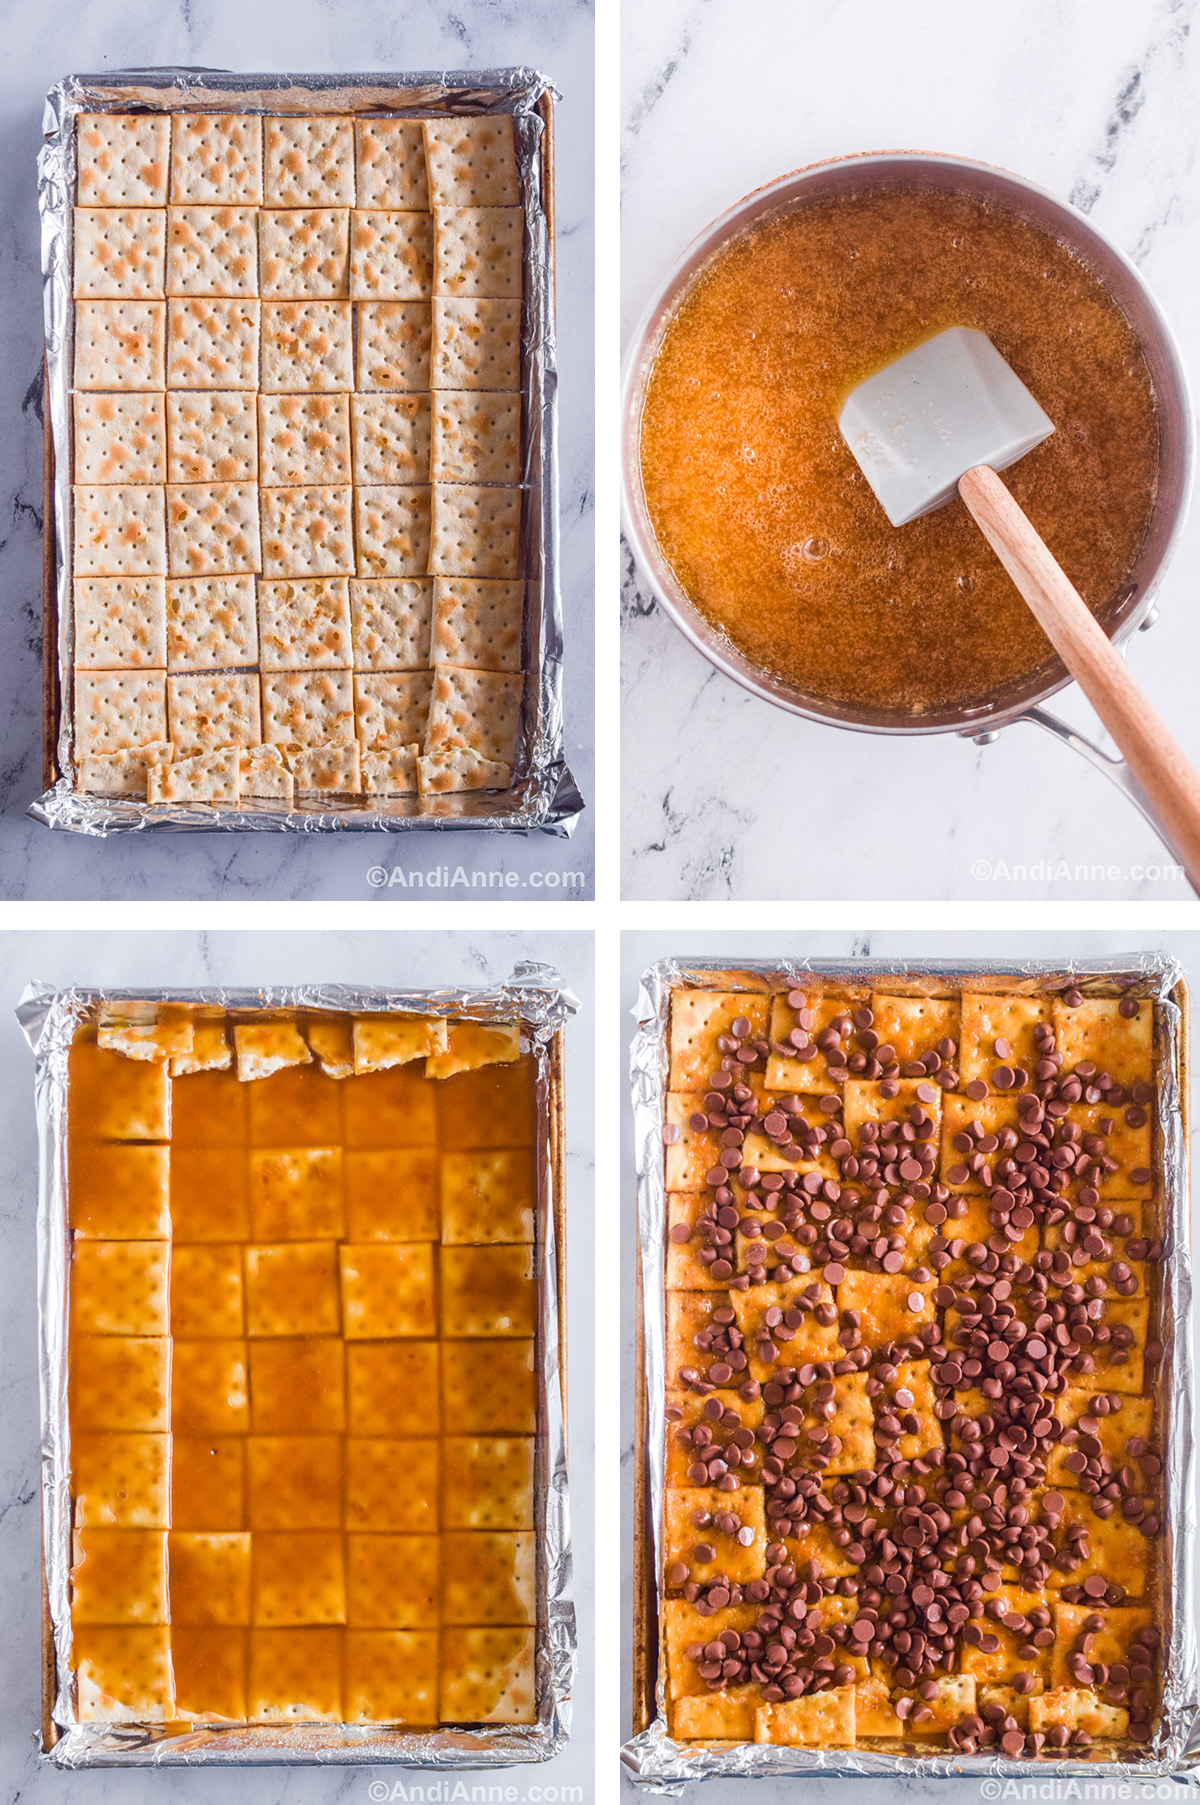 Four images showing steps to make the recipe. First is baking sheet with saltine crackers, second is sauce pan with toffee liquid mixture and spatula, third is toffee poured over top of crackers in baking sheet, Fourth is chocolate chips sprinkled over top of toffee crackers in baking sheet.